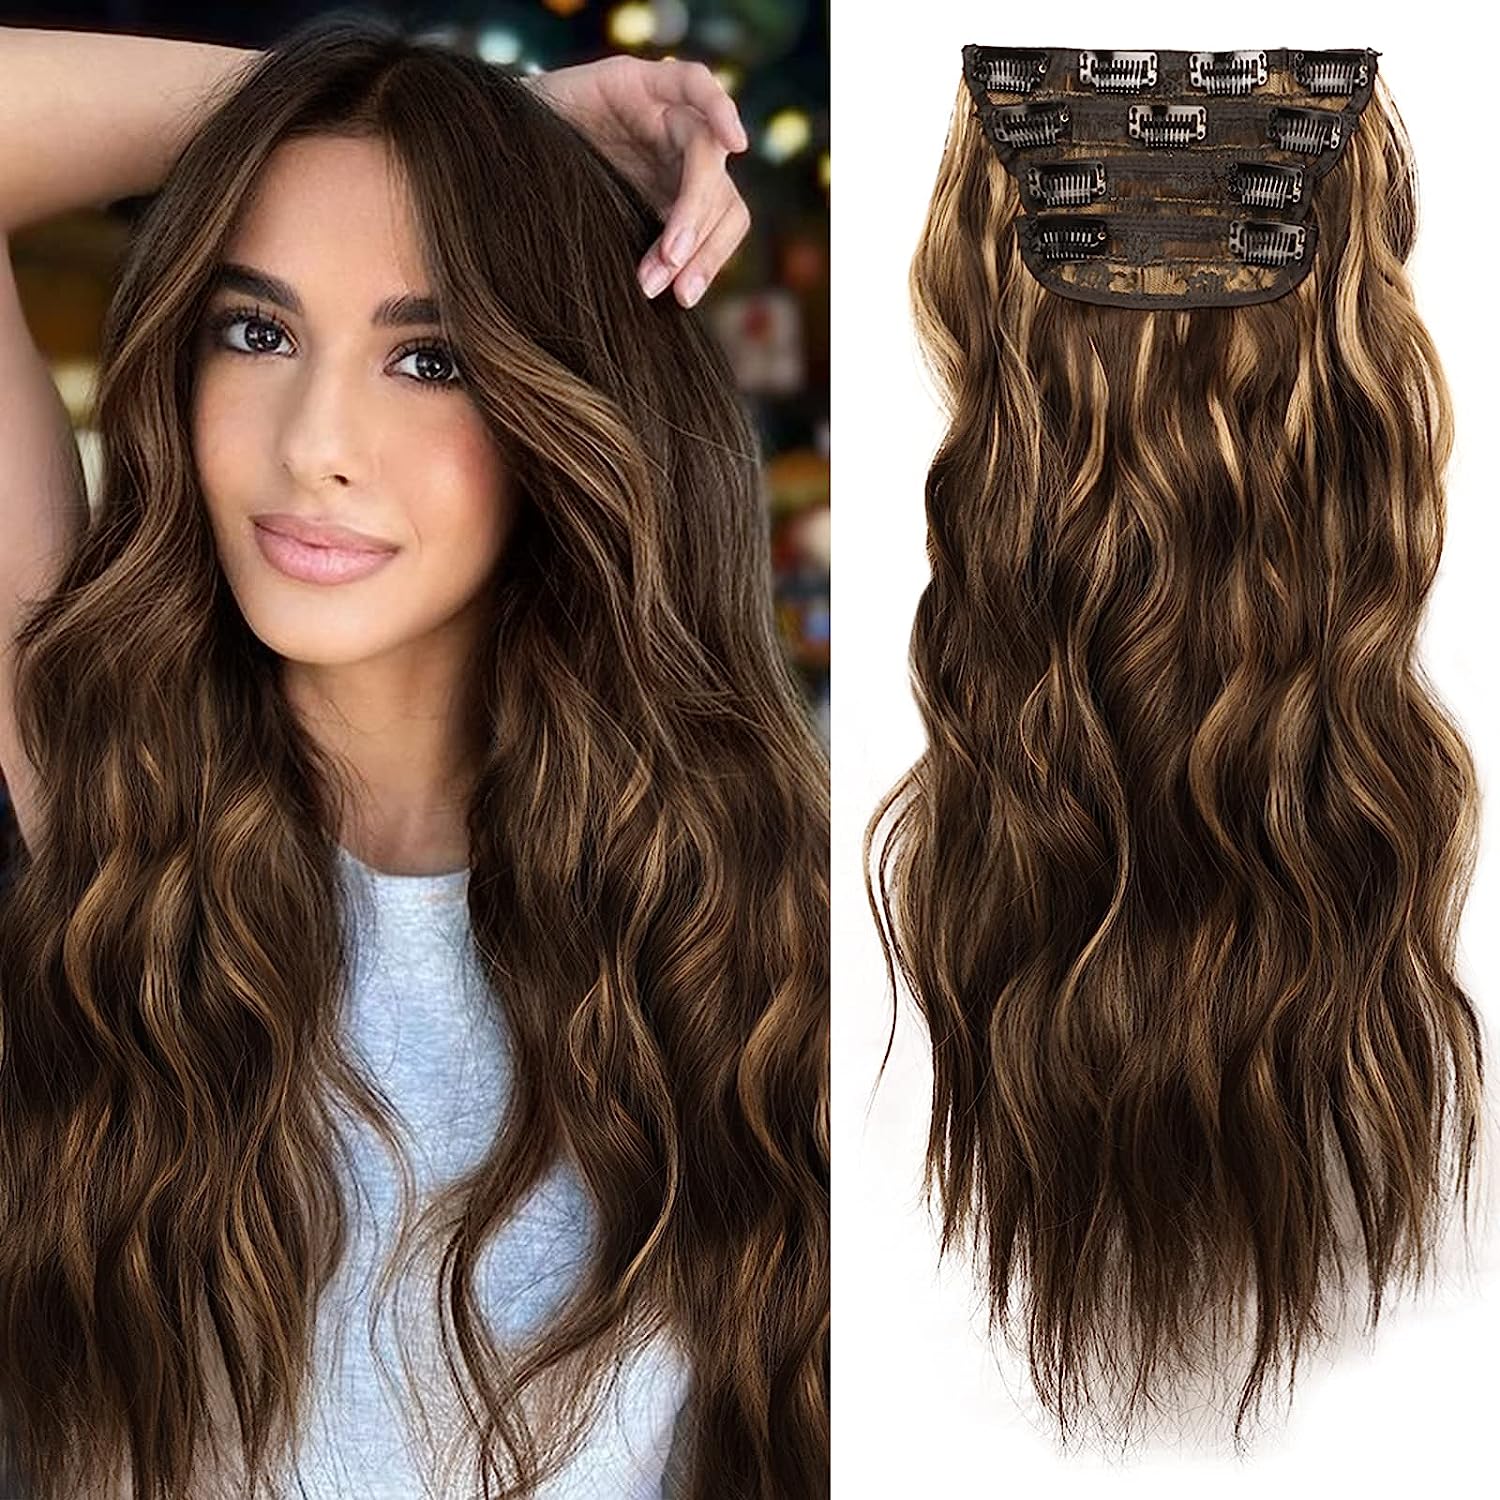 NAYOO Clip in Long Wavy Hair Extensions for Women 4PCS [...]